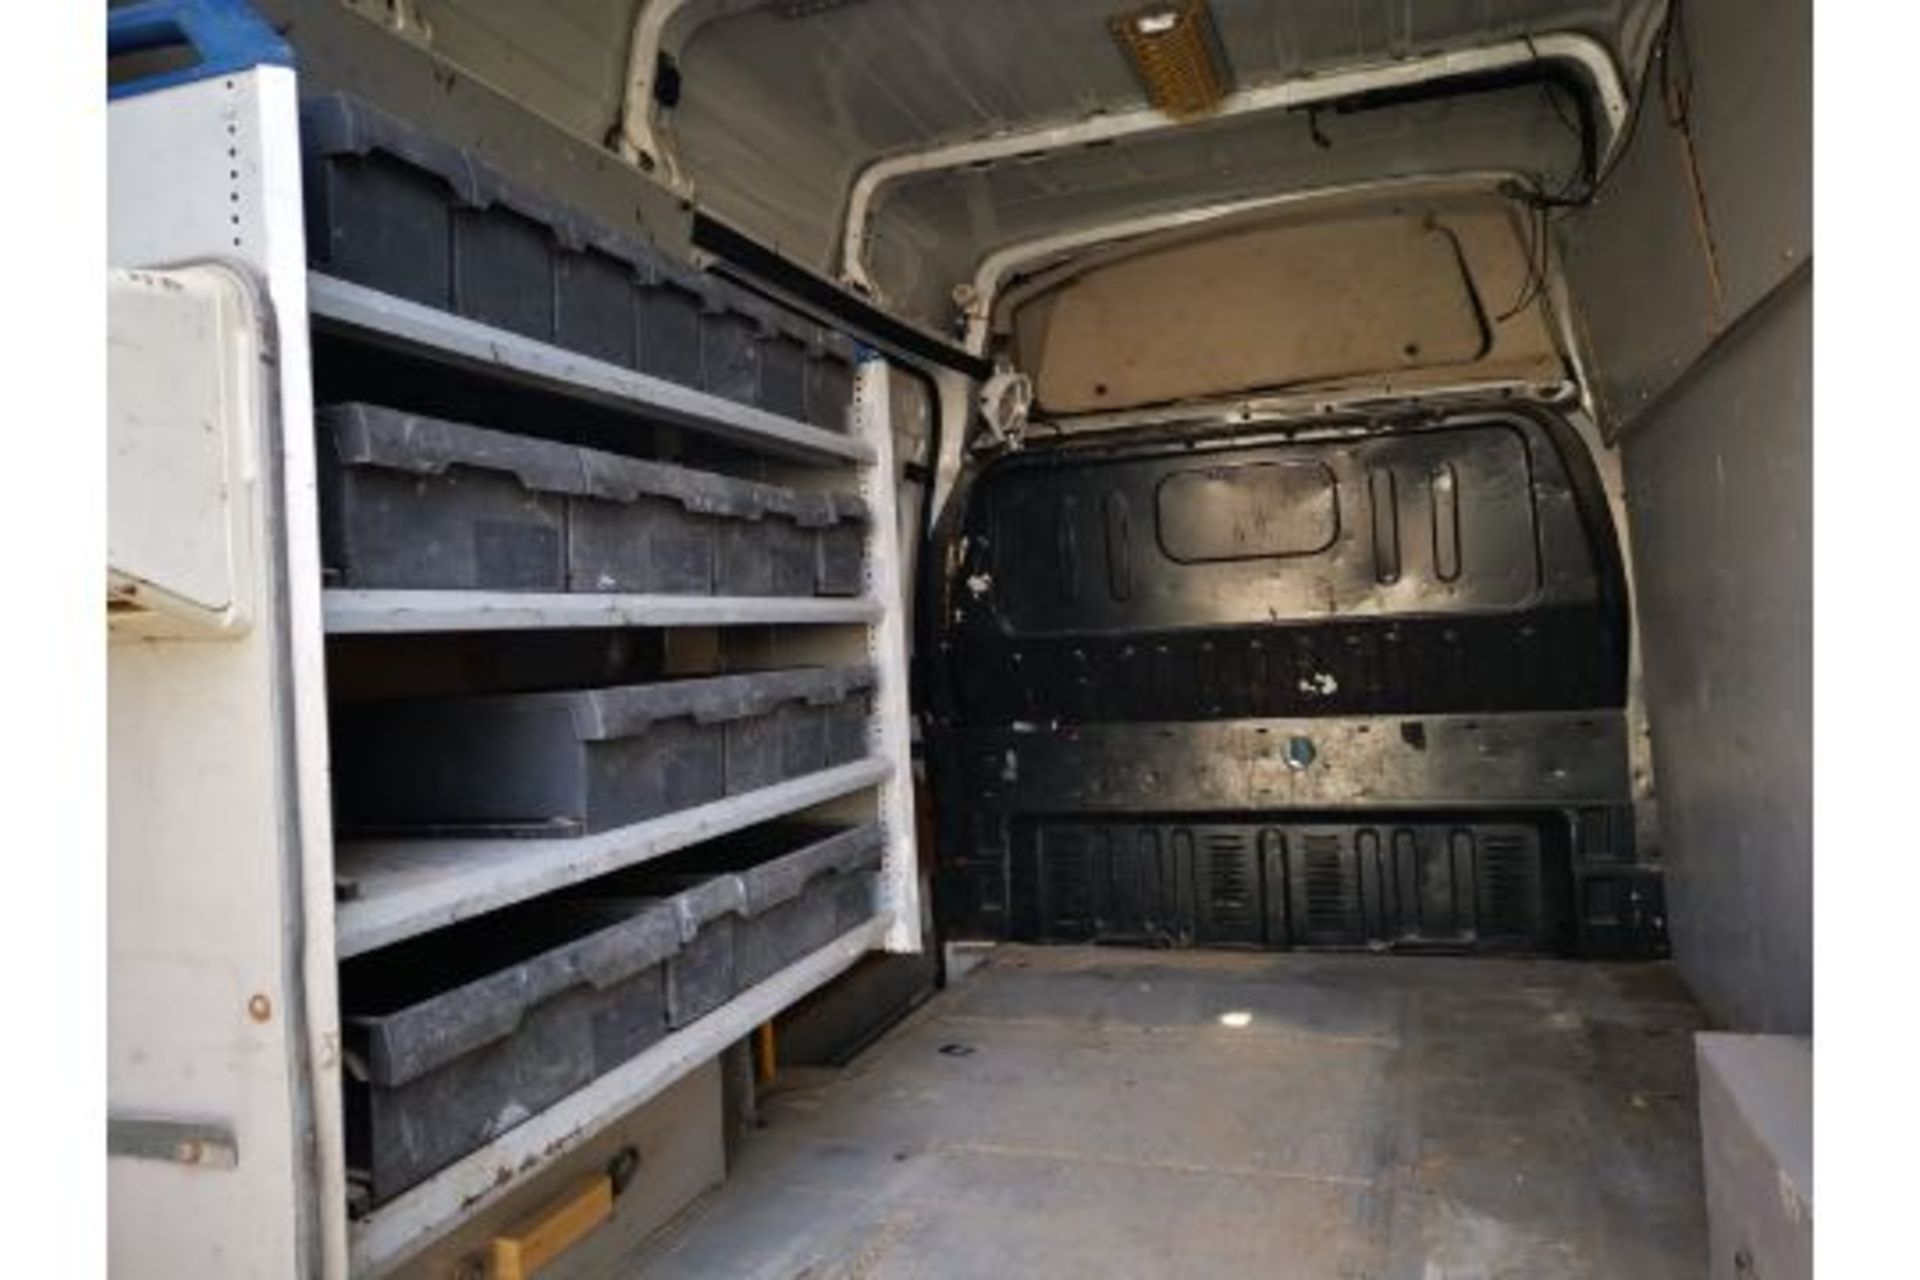 ENTRY DIRECT FROM LOCAL AUTHORITY Ford Transit 100 - Image 15 of 26